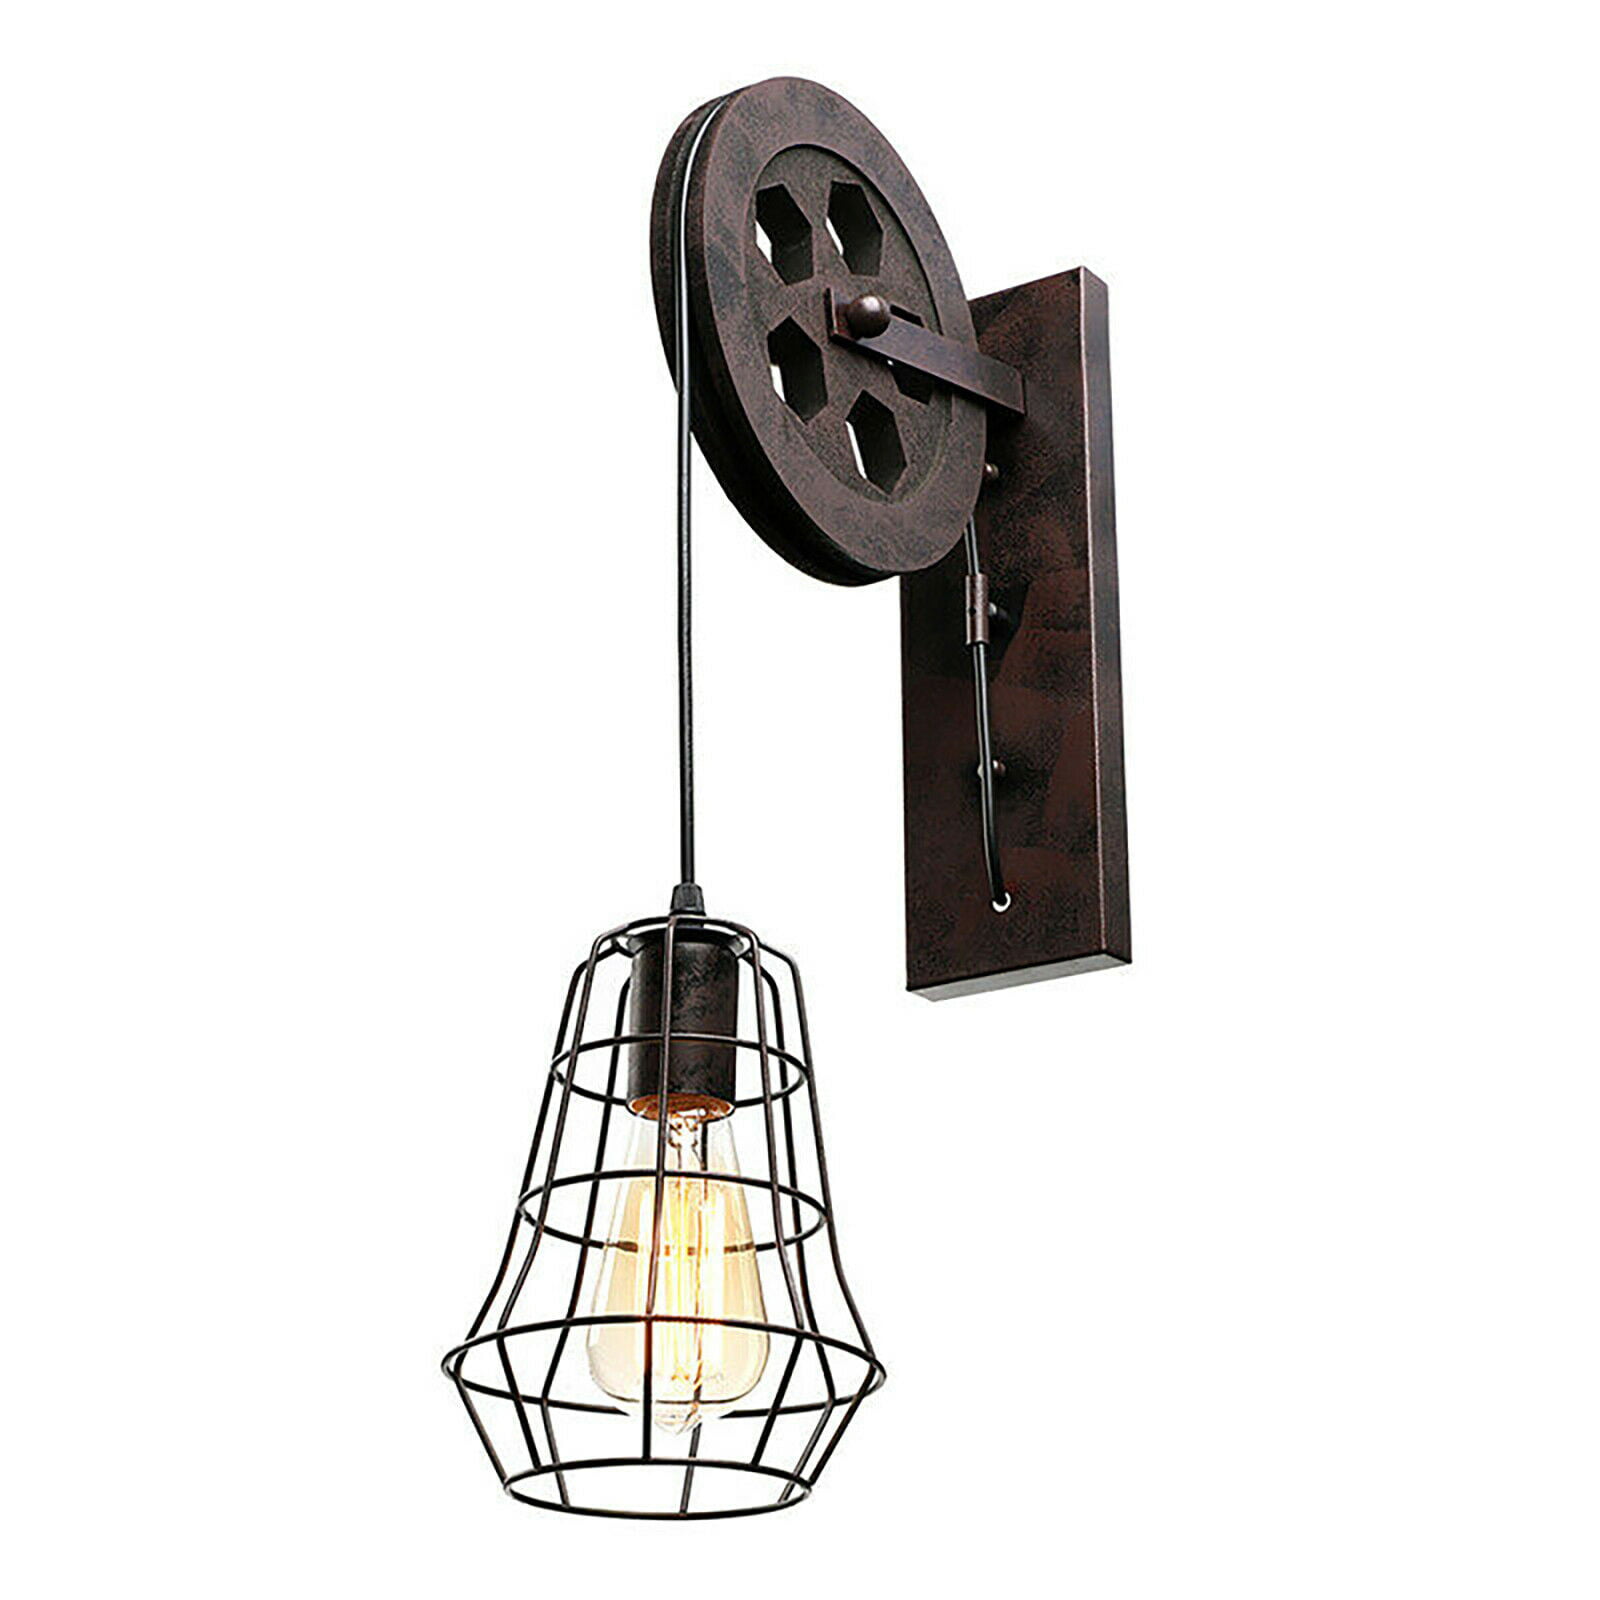 Industrial Rustic Wall Lamp Single Cage Wall Light Hallway Warehouse Wall Sconce 